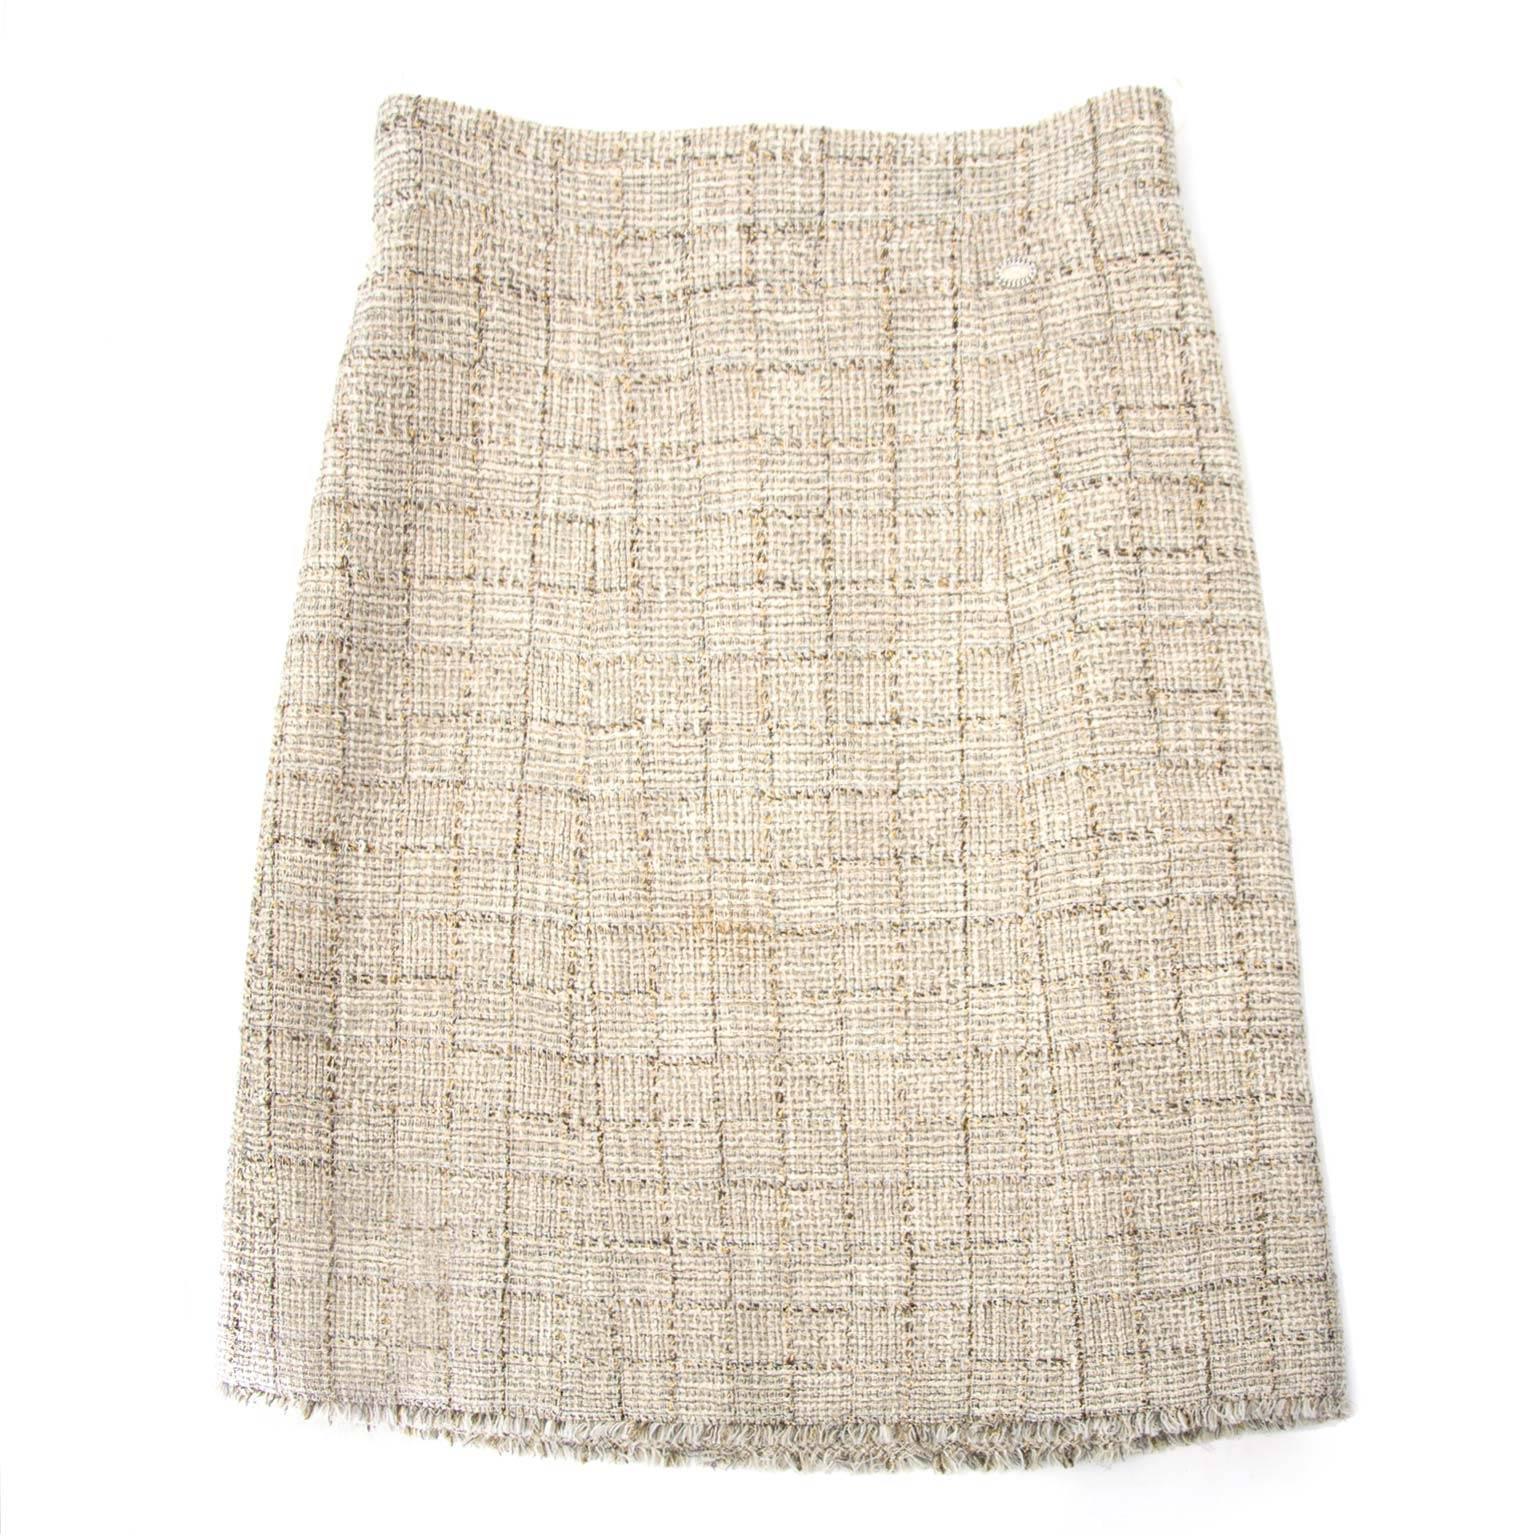 Excellent condition!

Chanel Beige Tweed Midi Skirt - Size 40 (FR)

This timeless skirt by Chanel is a must have in every woman's closet.
The beige and metallic threading give the skirt a sophisticated look.
The skirt opens and closes with a zipper